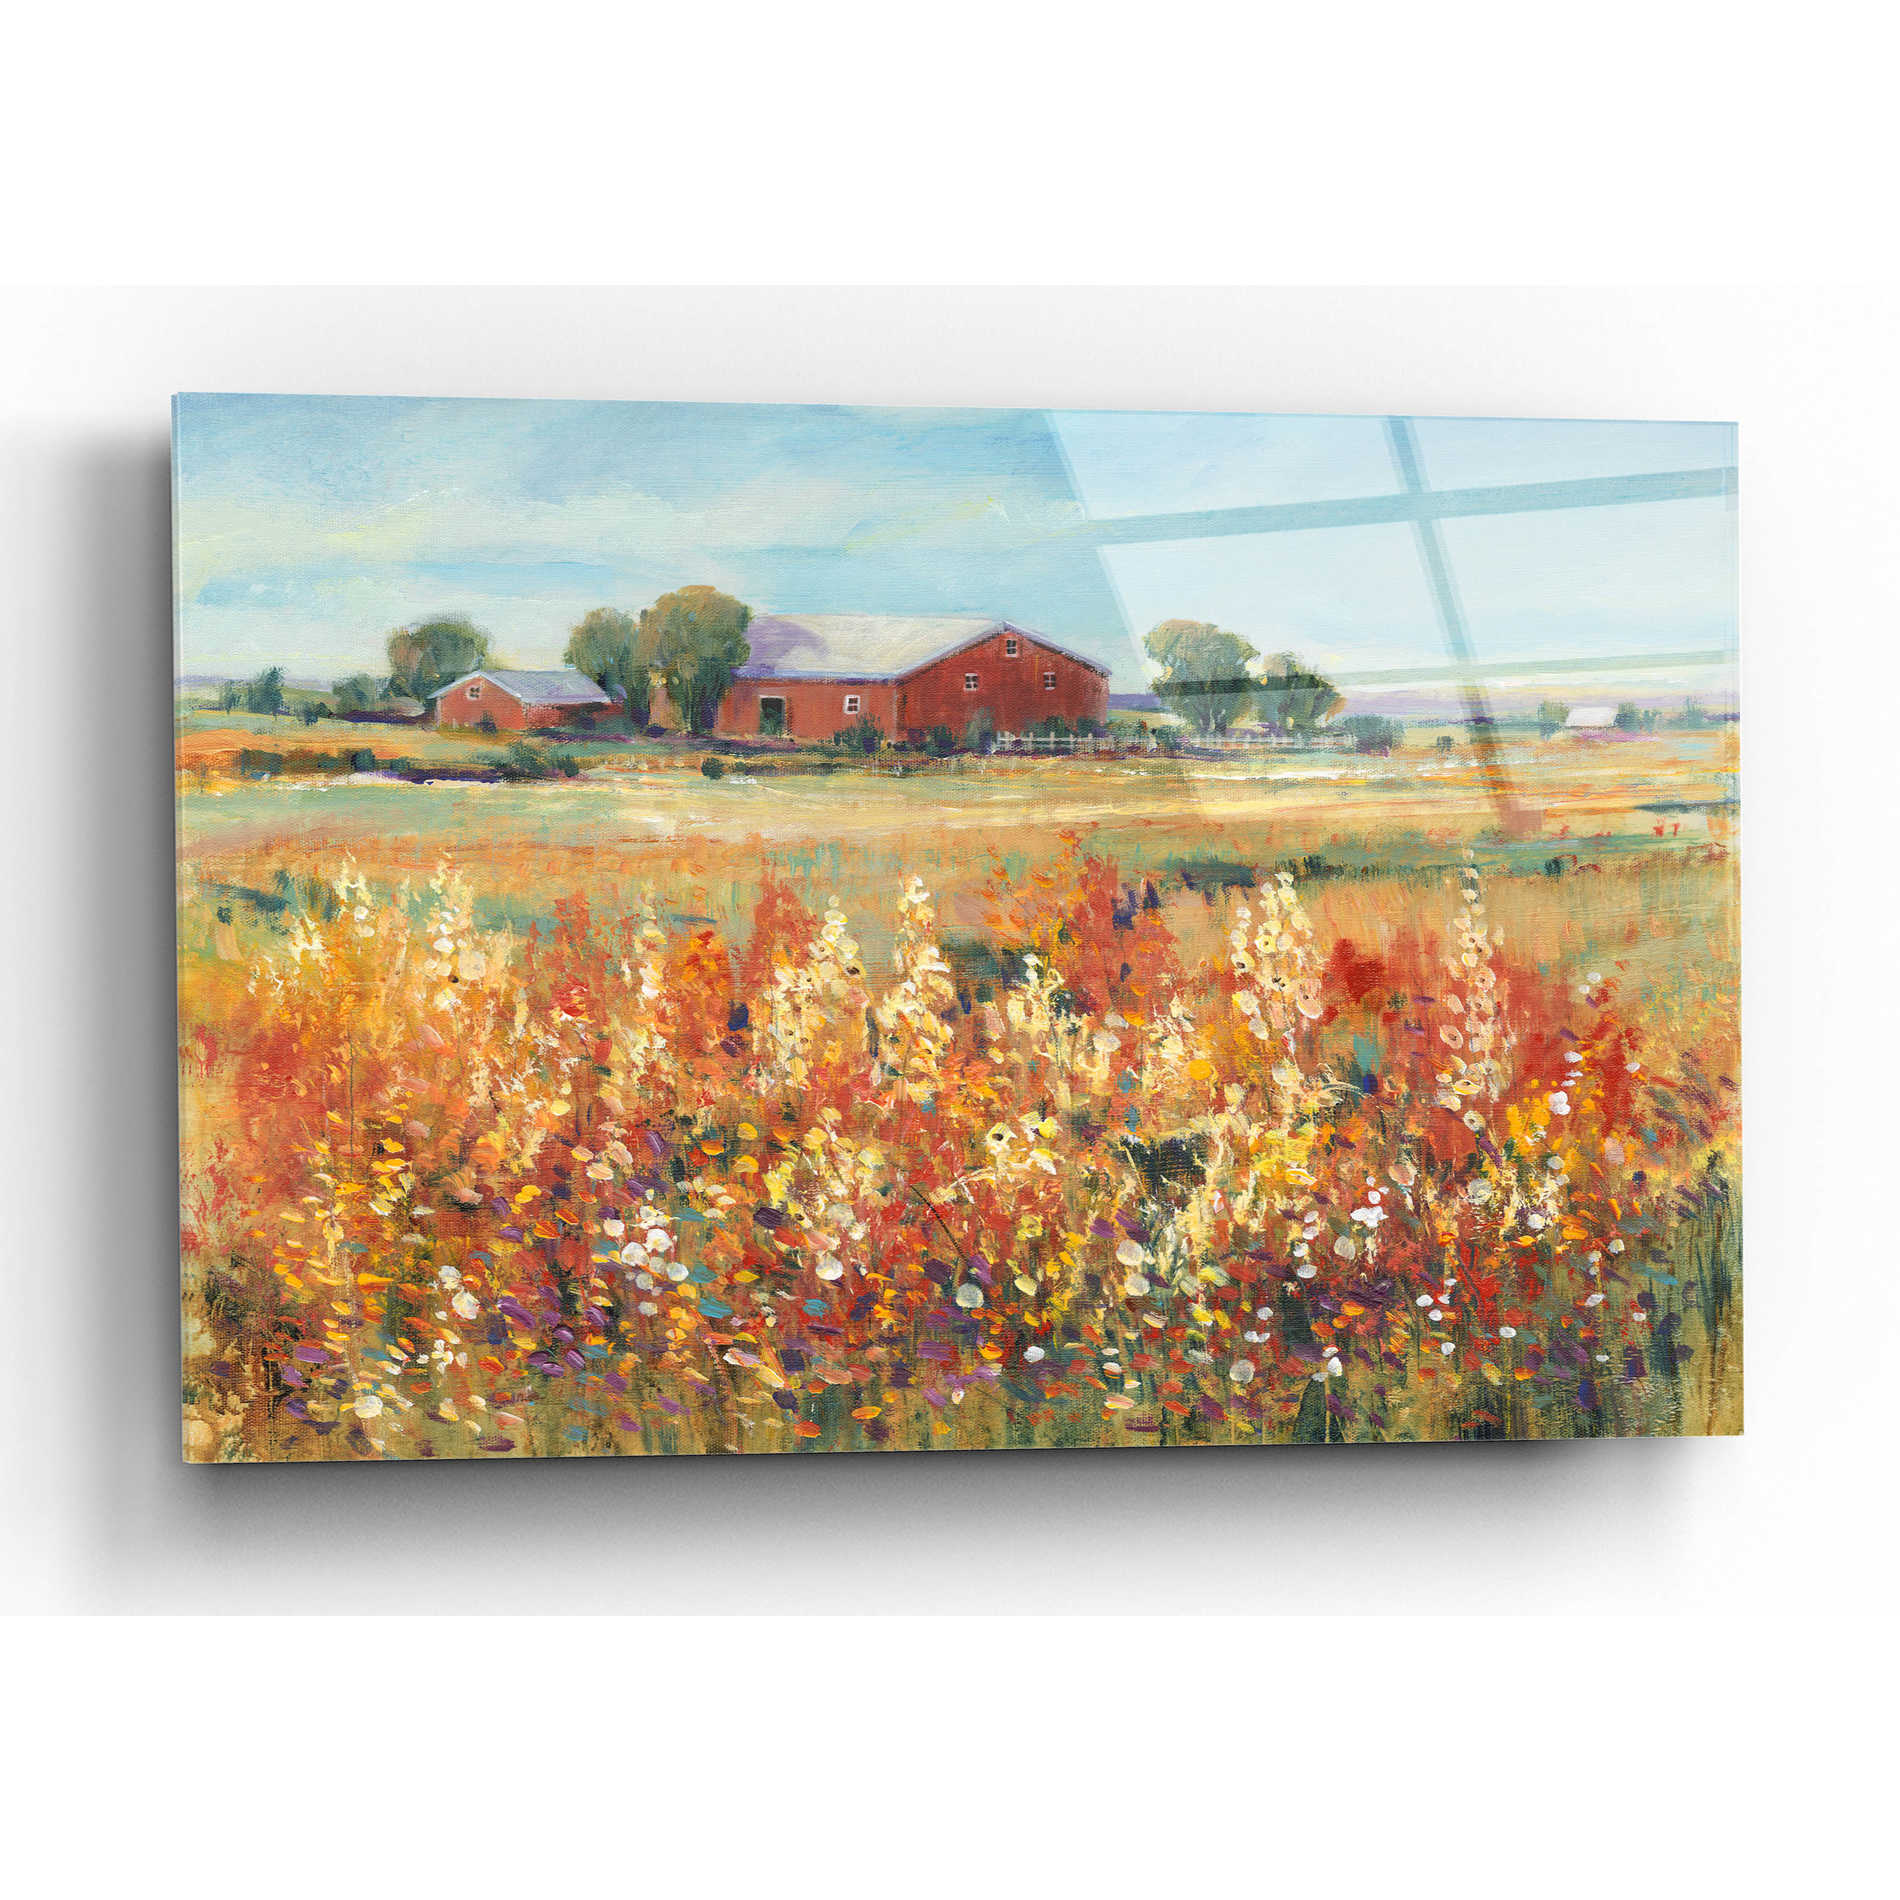 Epic Art 'Country View II' by Tim O'Toole, Acrylic Glass Wall Art,16x12